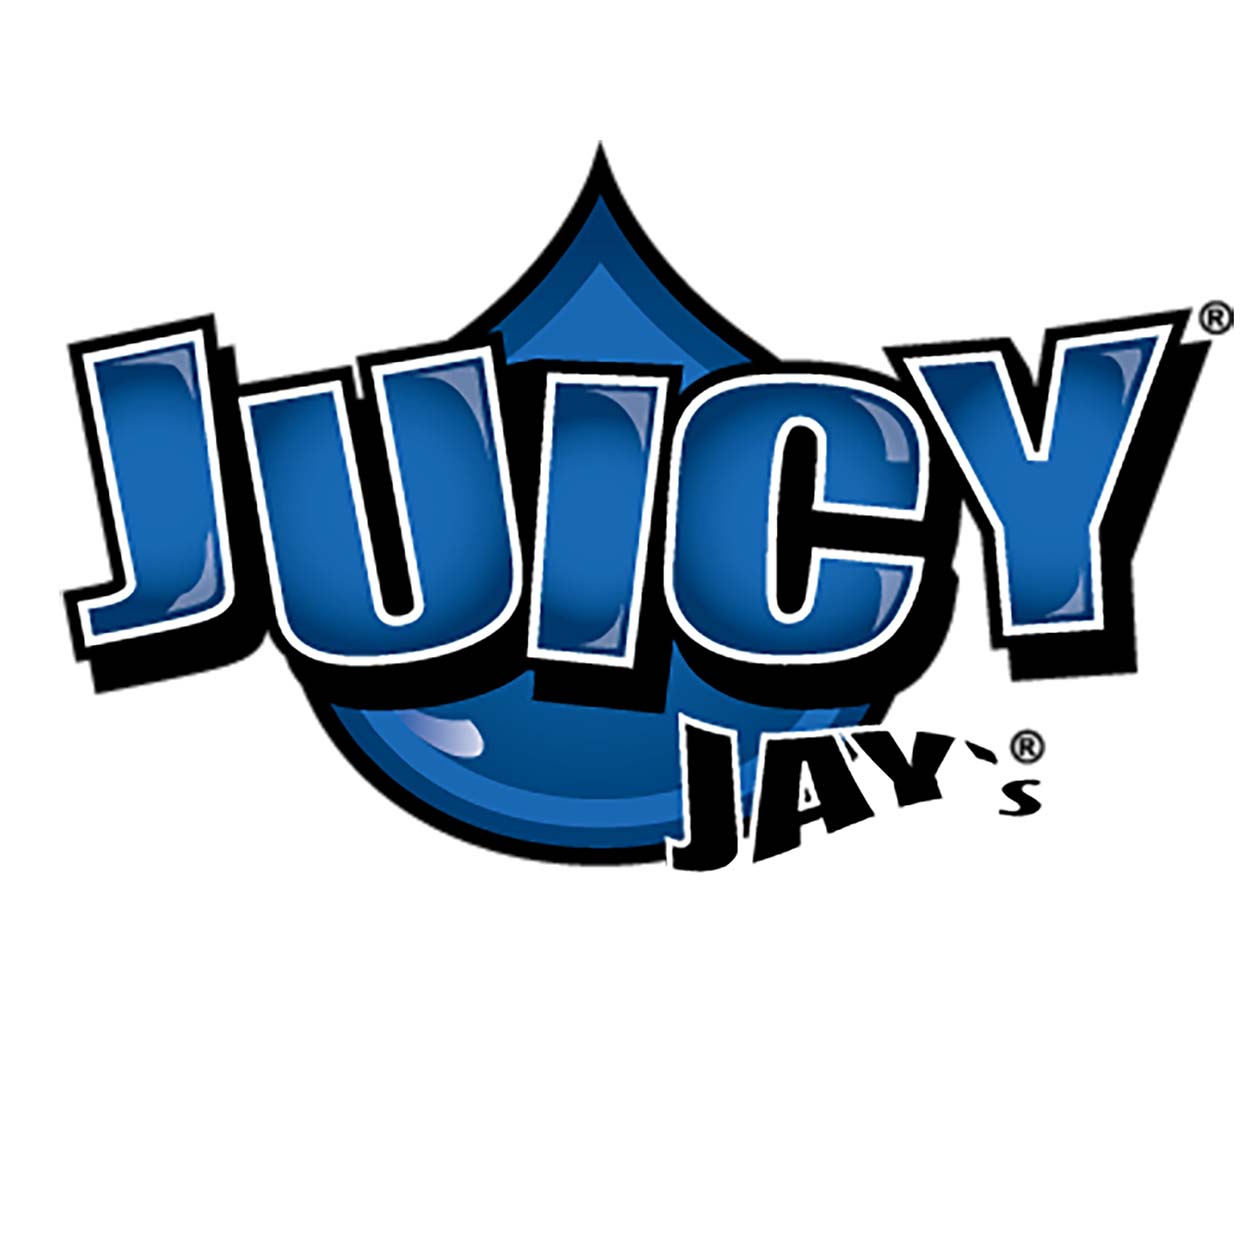 juicy jay's papers